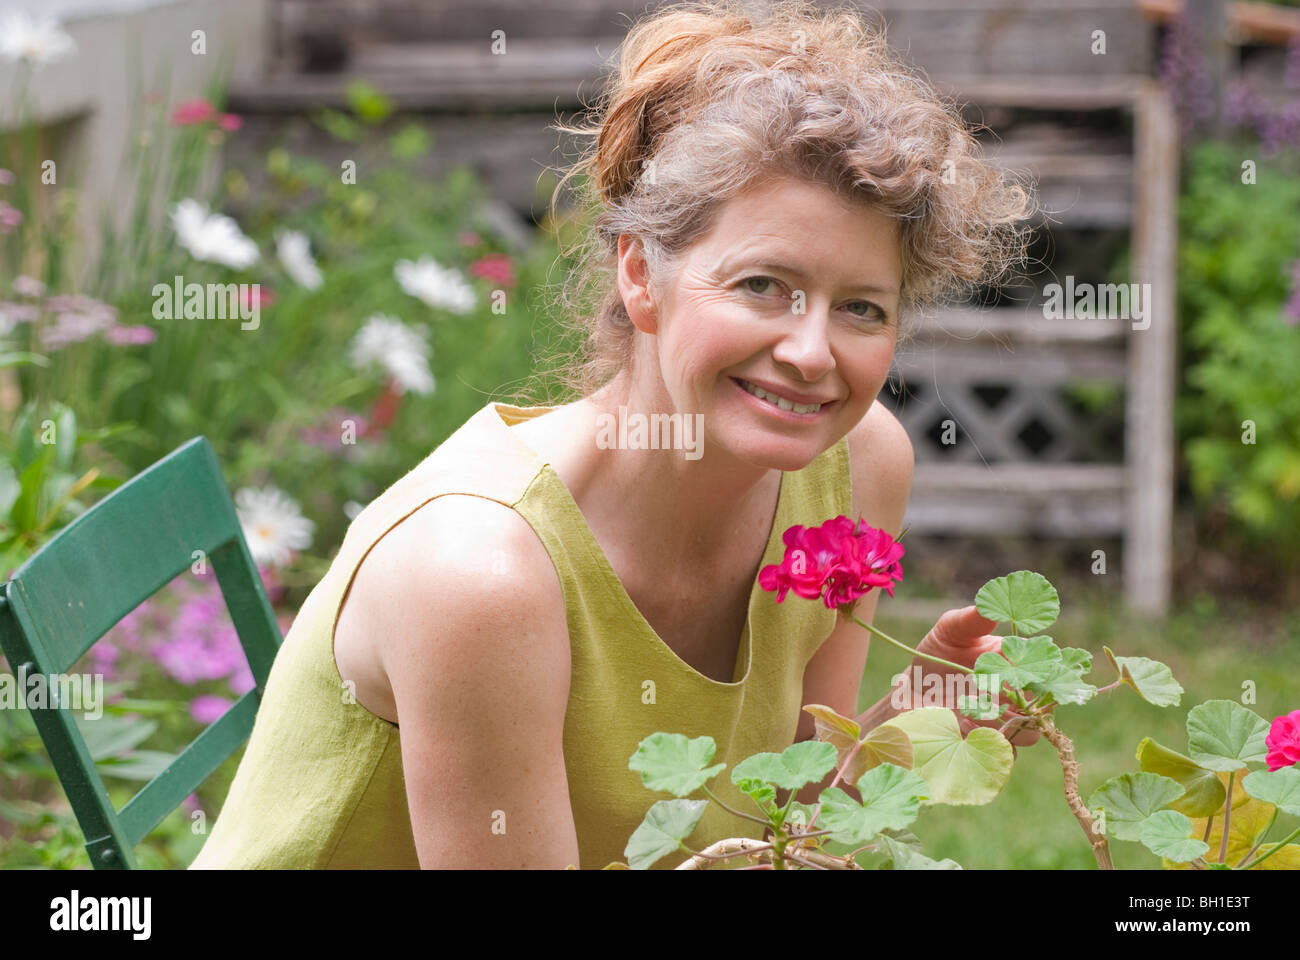 Woman in mid 50s seated in garden holding geranium, Manitoba, Canada Stock Photo